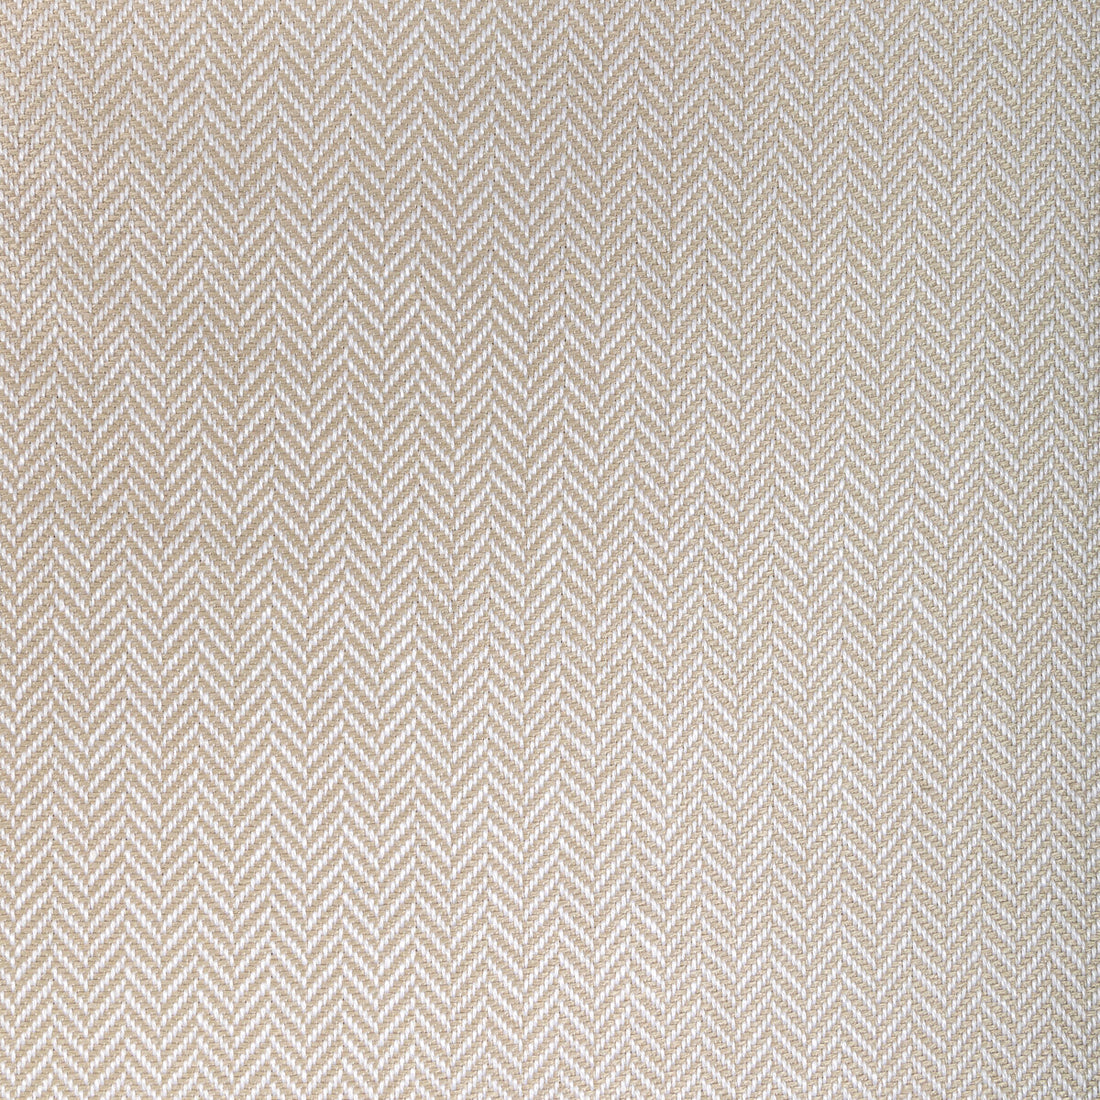 Kerolay Linen Weave fabric in dove color - pattern 8022107.11.0 - by Brunschwig &amp; Fils in the Lorient Weaves collection